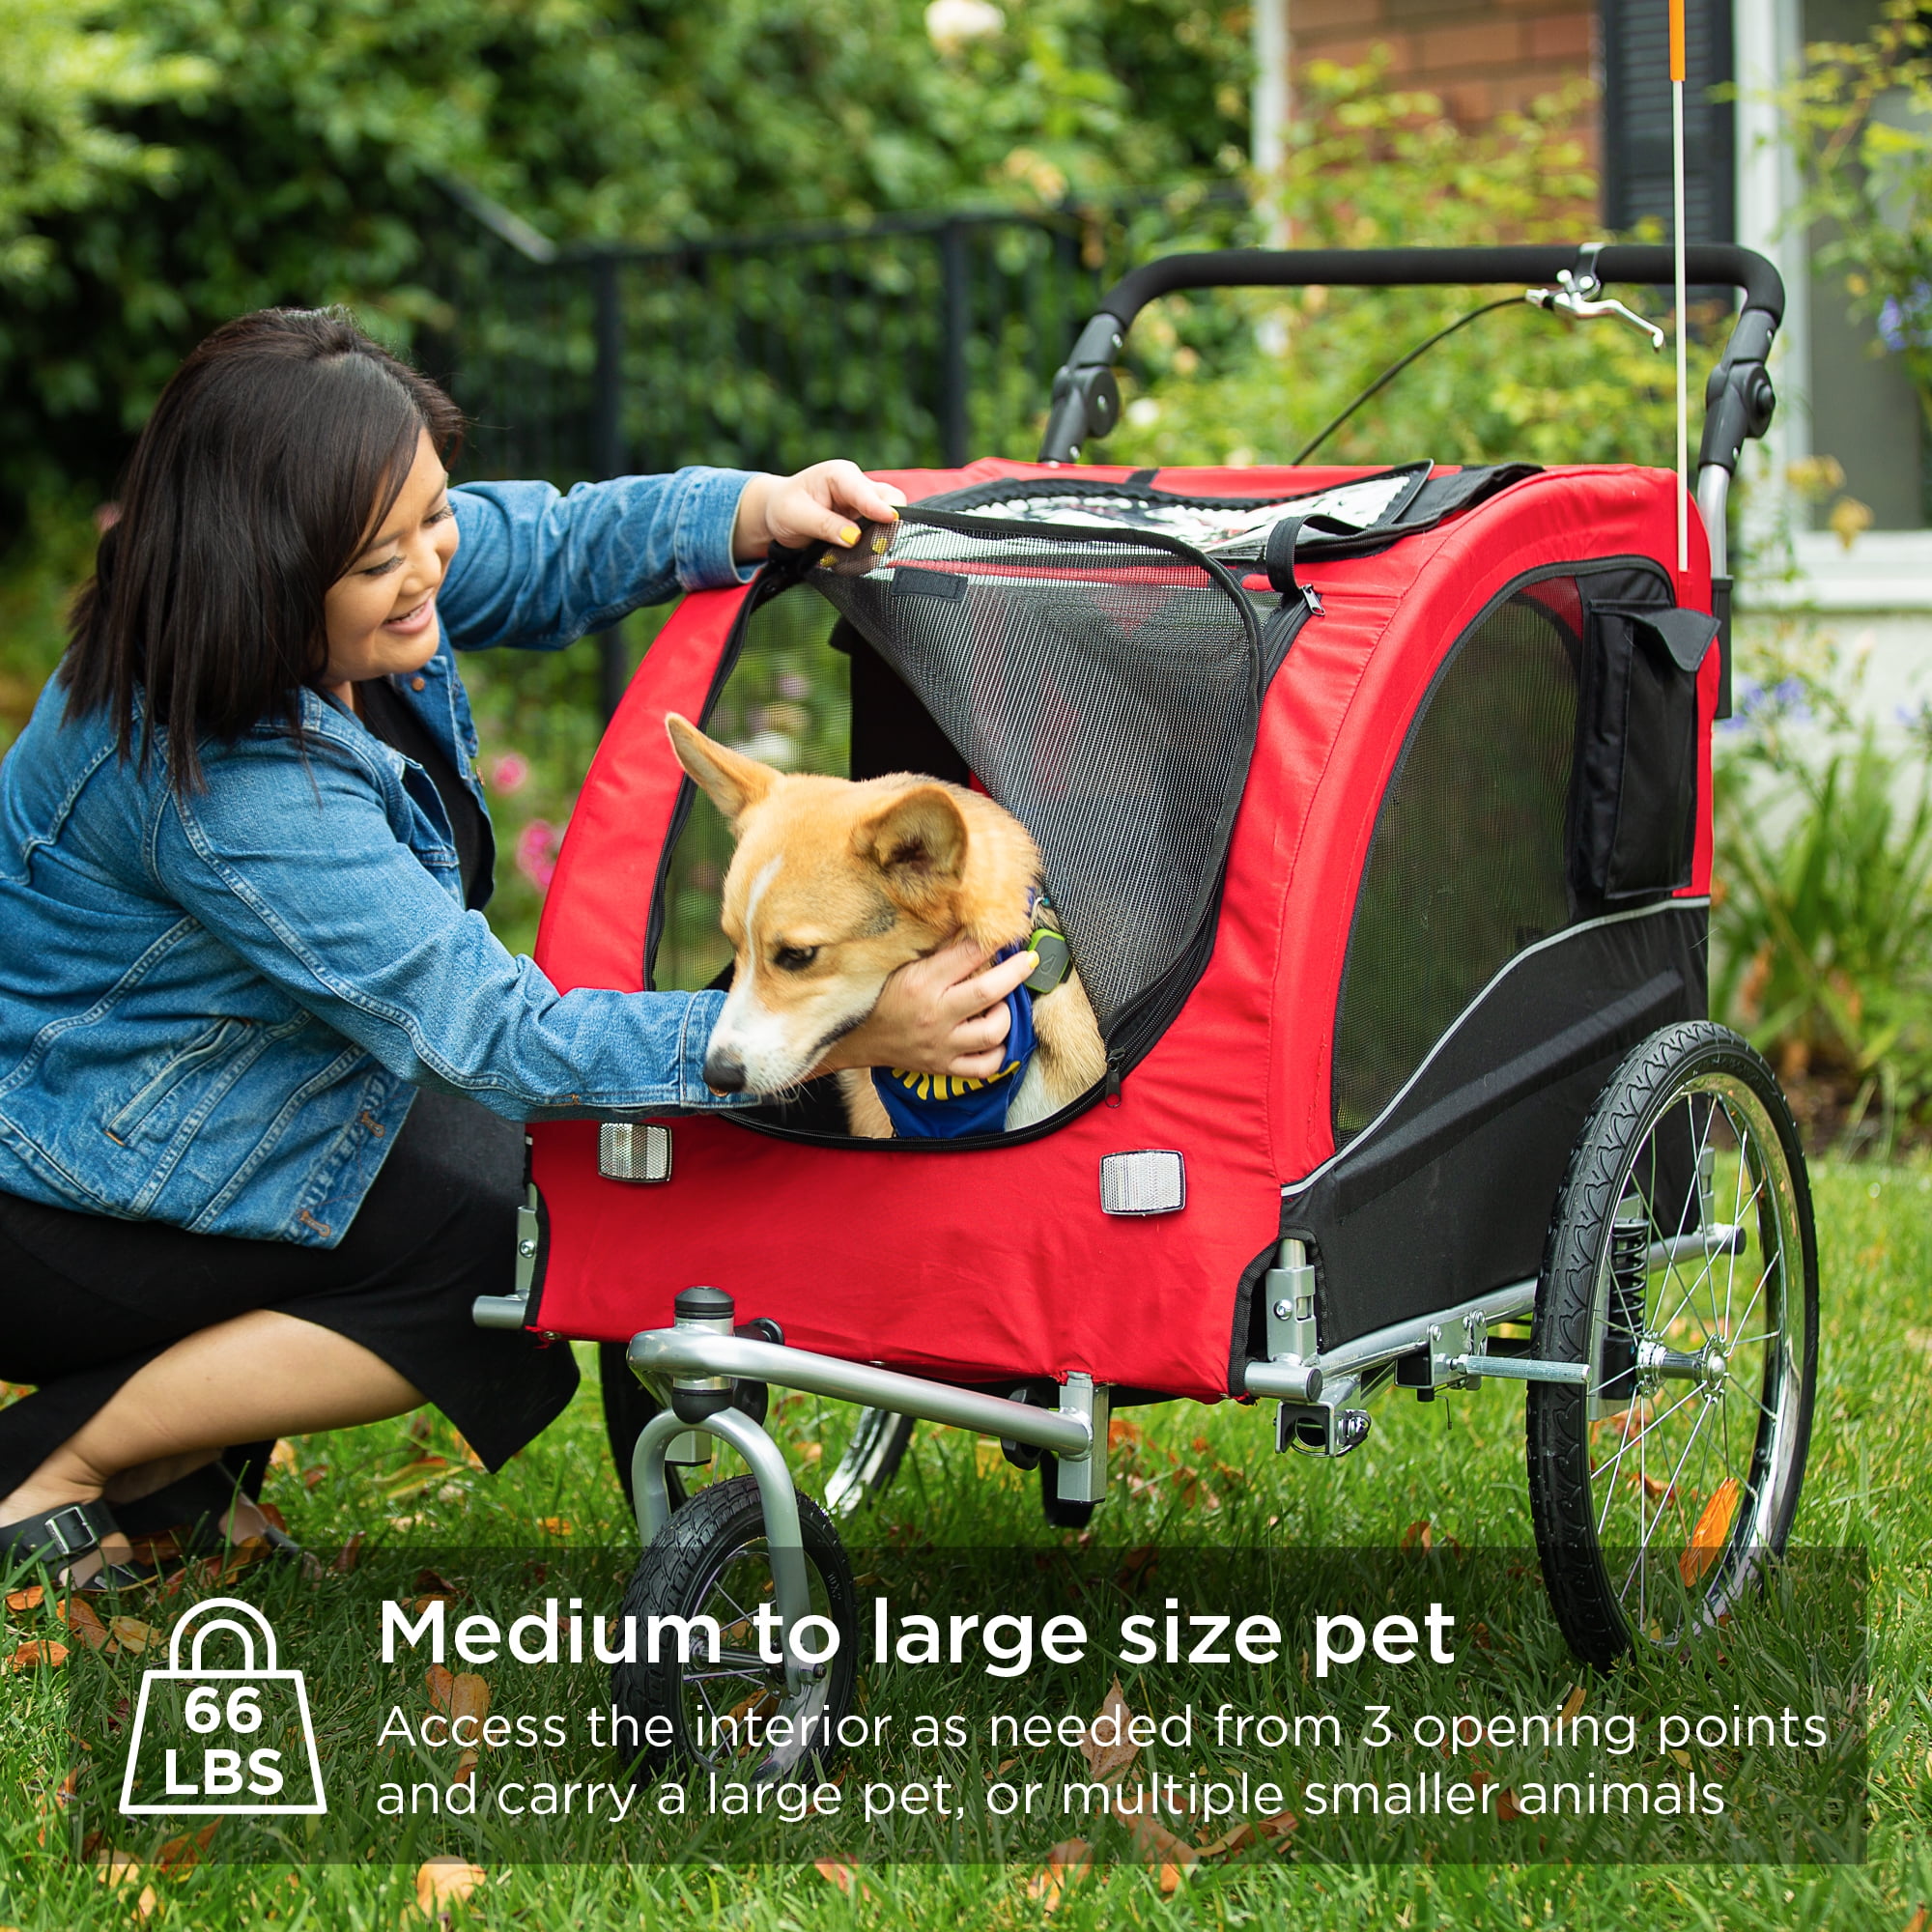 Premium Dog Buggies and Strollers Ocean Blue 2-in-1 Happy Pet Dog Stroller and Bike Pet Trailer for Medium and Large Dogs Heavy-Duty Pet Strollers with Air-Filled Tires Rear Brake System 